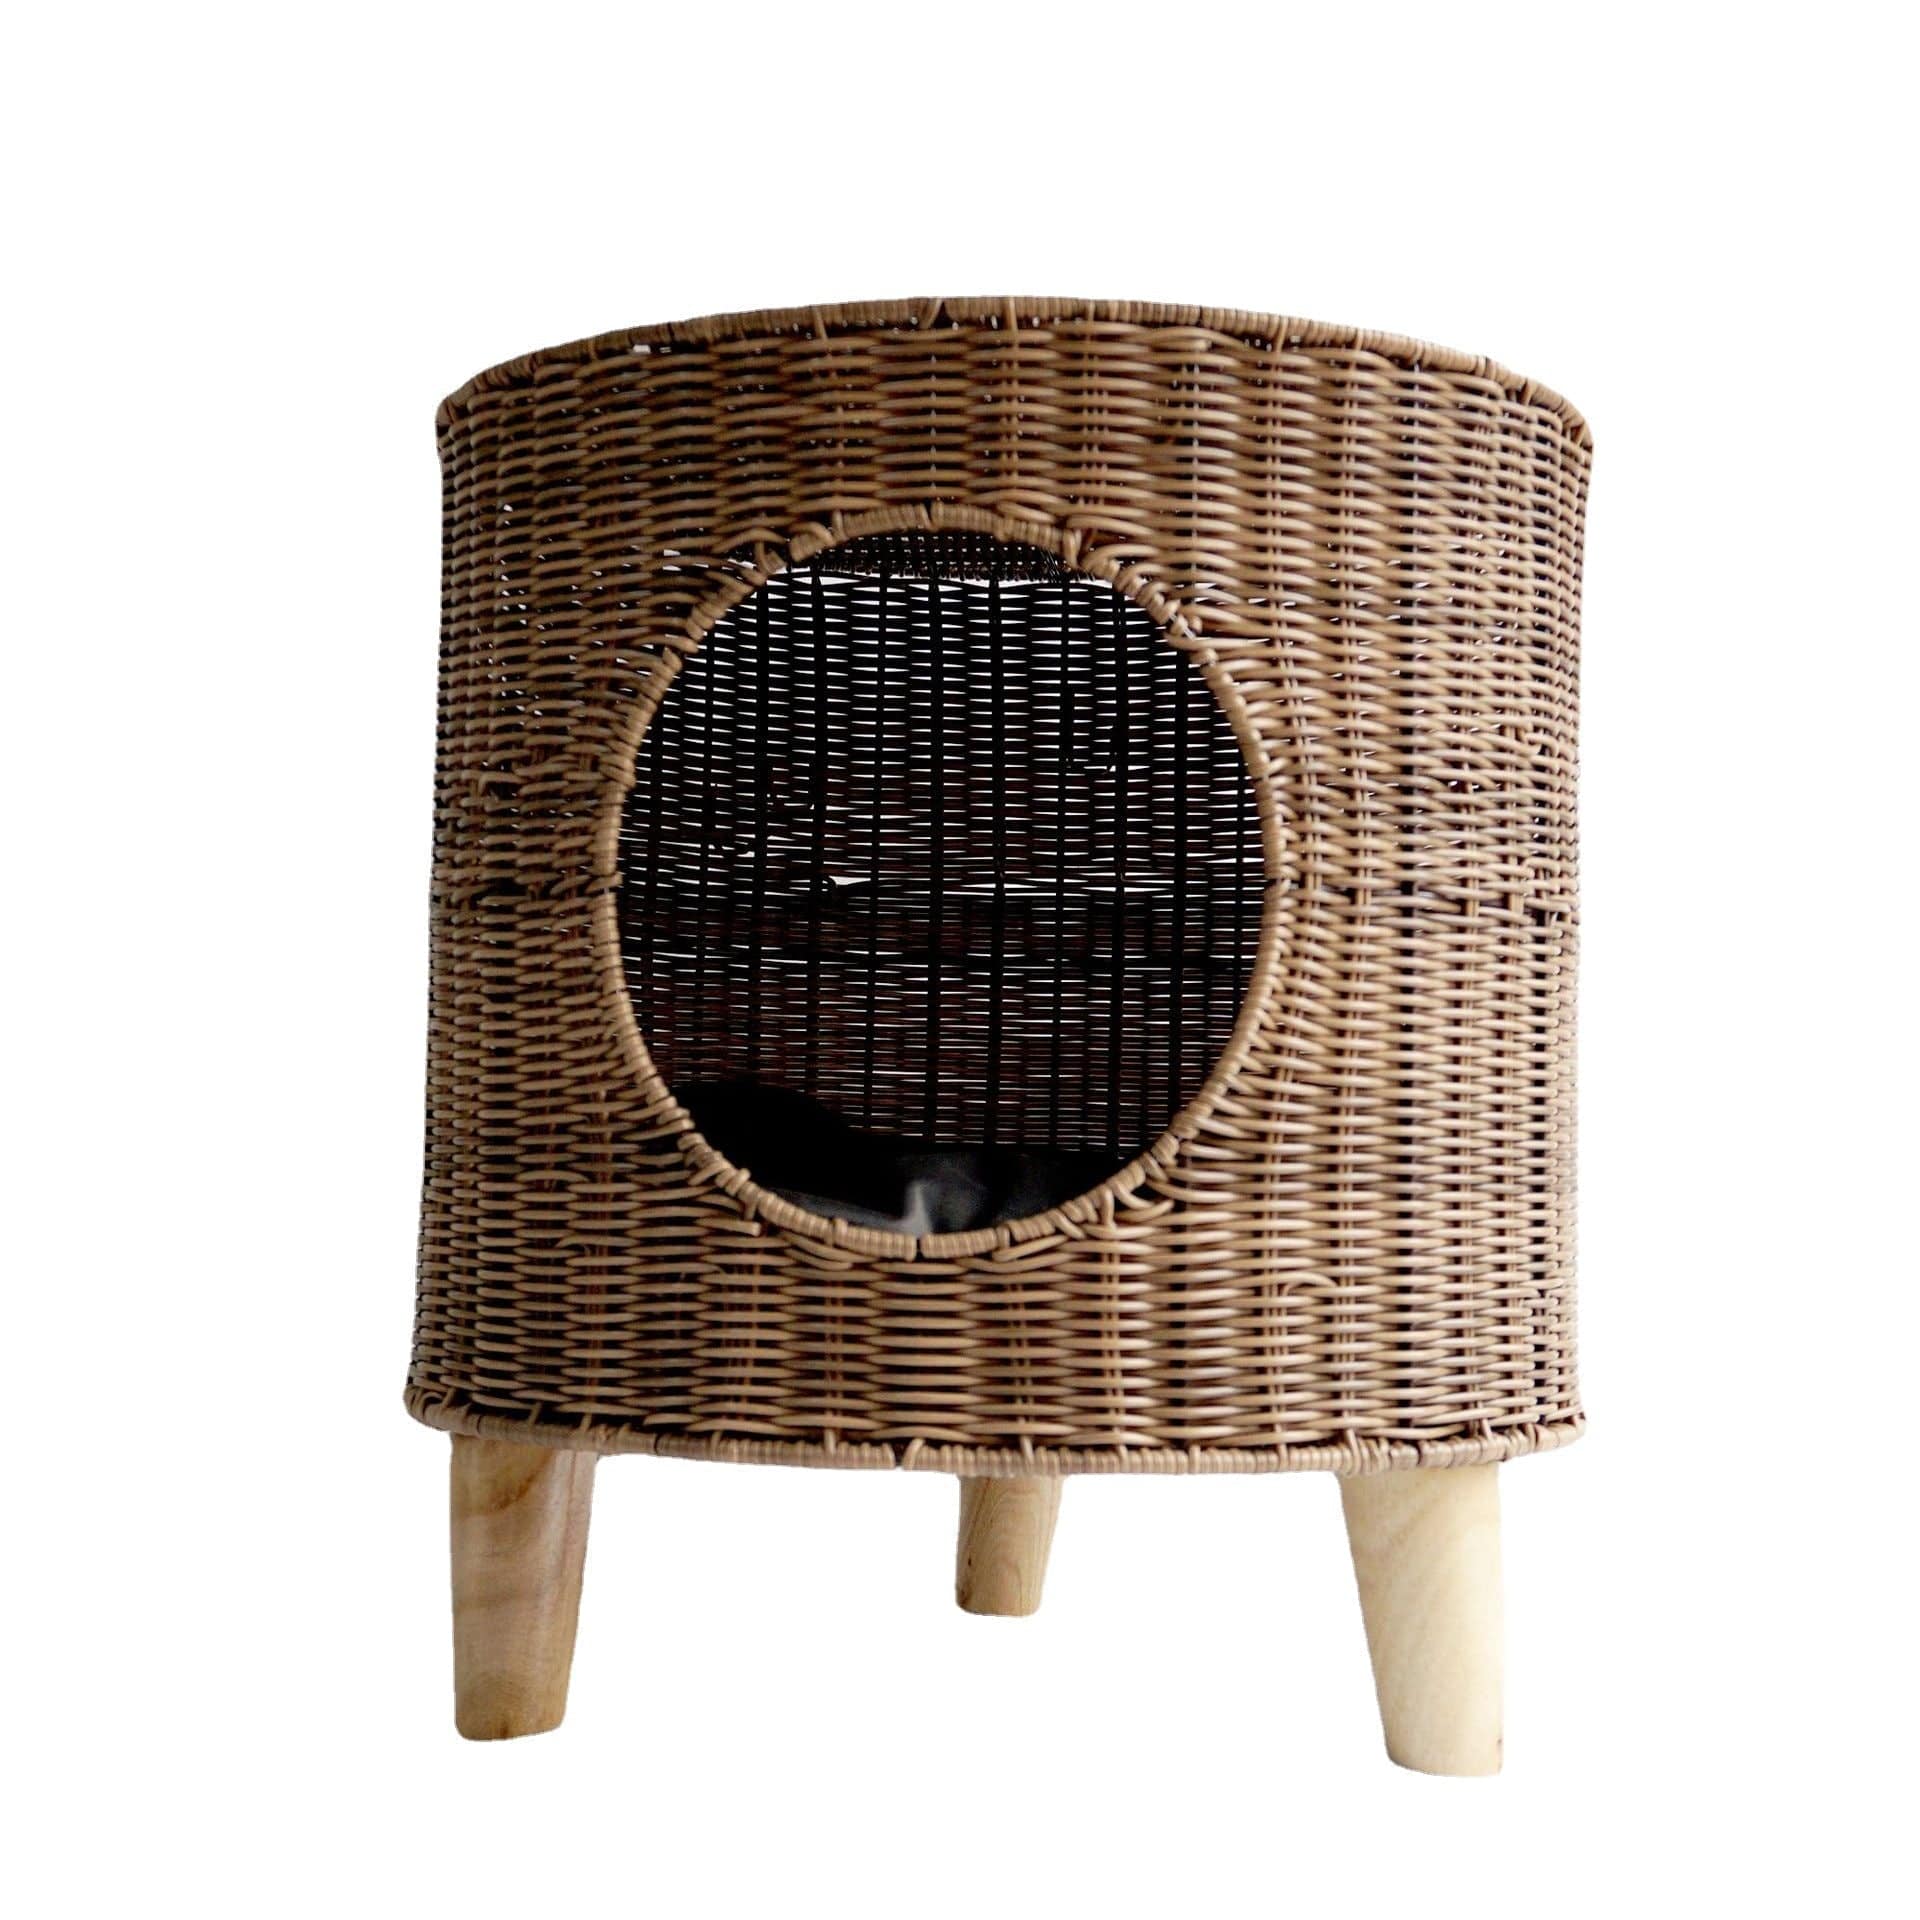 Cane Woven Cat Kennel, Pet Bed, Cat Supplies, Removable and Washable Pet Warm Nest, Knitting Crafts In Summer - CLASSY CLOSET BOUTIQUECane Woven Cat Kennel, Pet Bed, Cat Supplies, Removable and Washable Pet Warm Nest, Knitting Crafts In Summereperlo9CFCC4F2EA3C45908D574F79D395E4C4